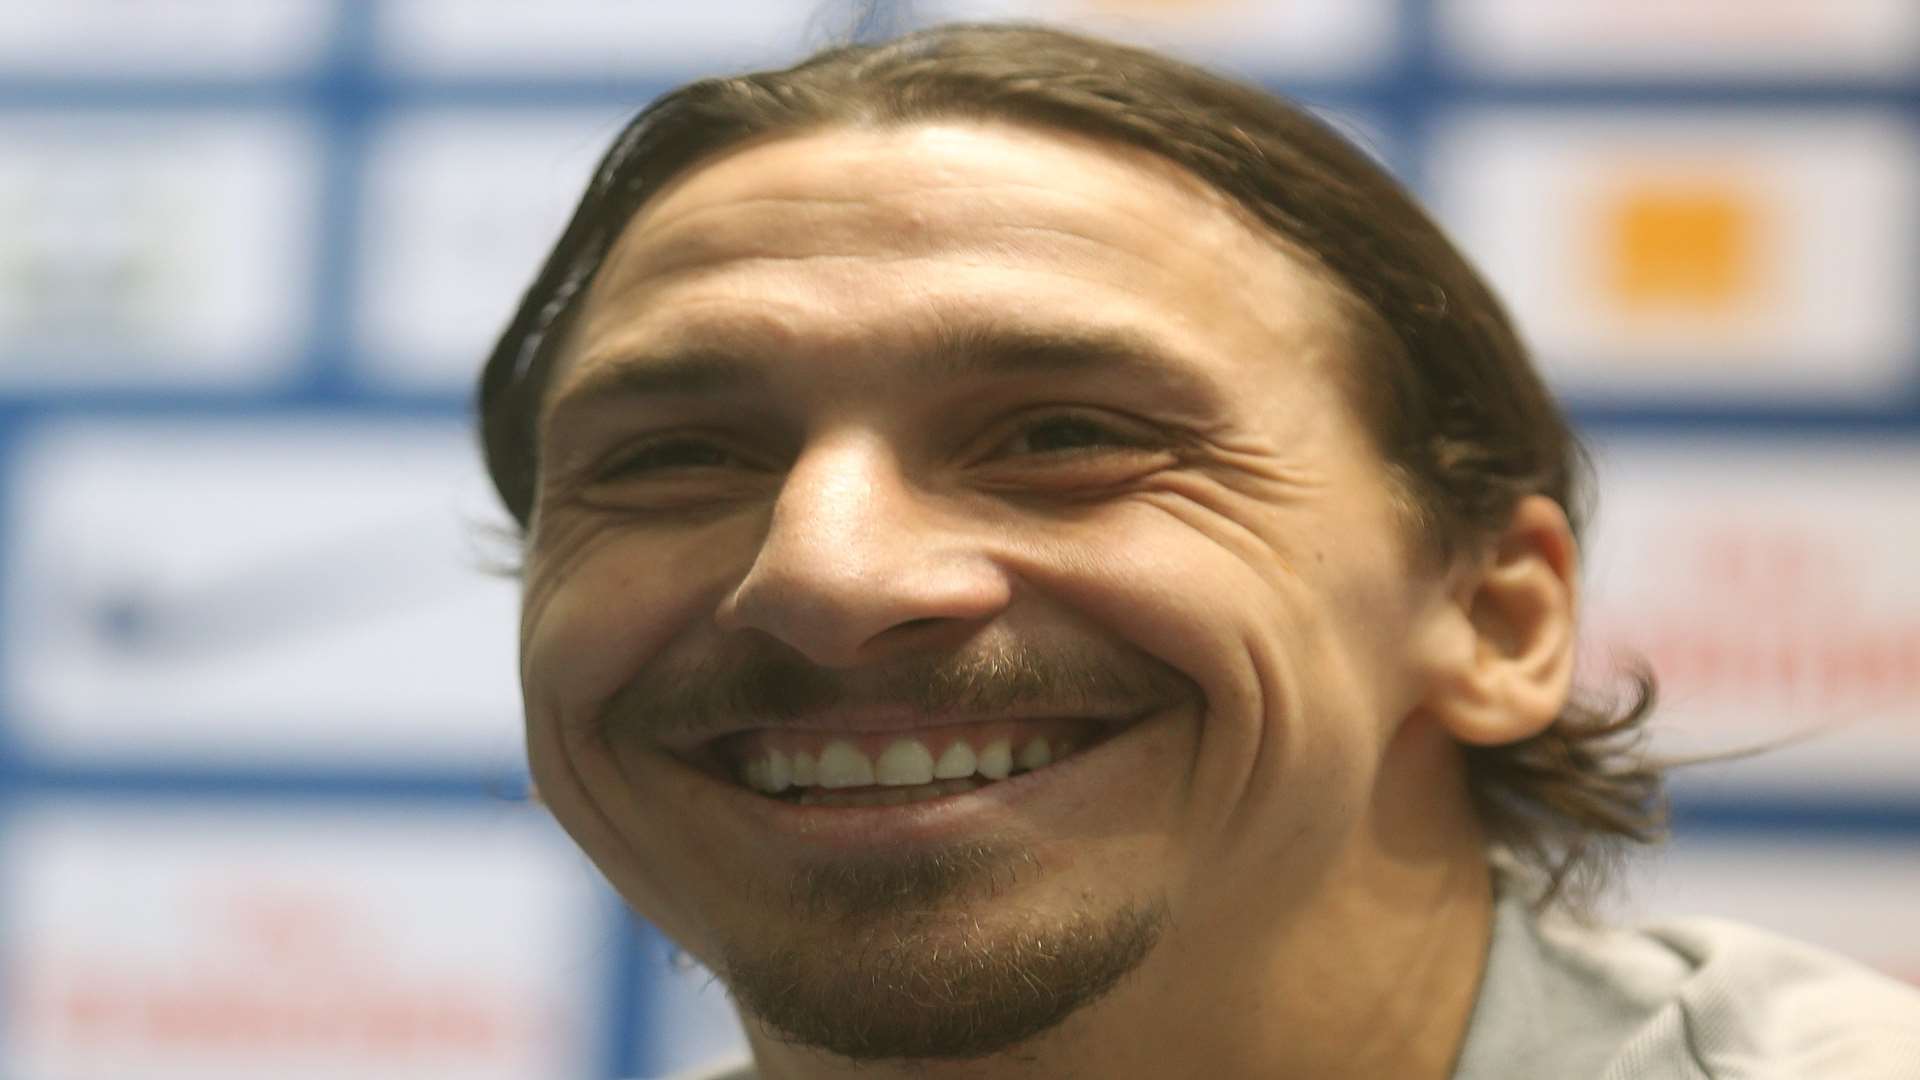 The lucky winner managed to make more money per minute than Manchester United player Zlatan Ibrahimovic